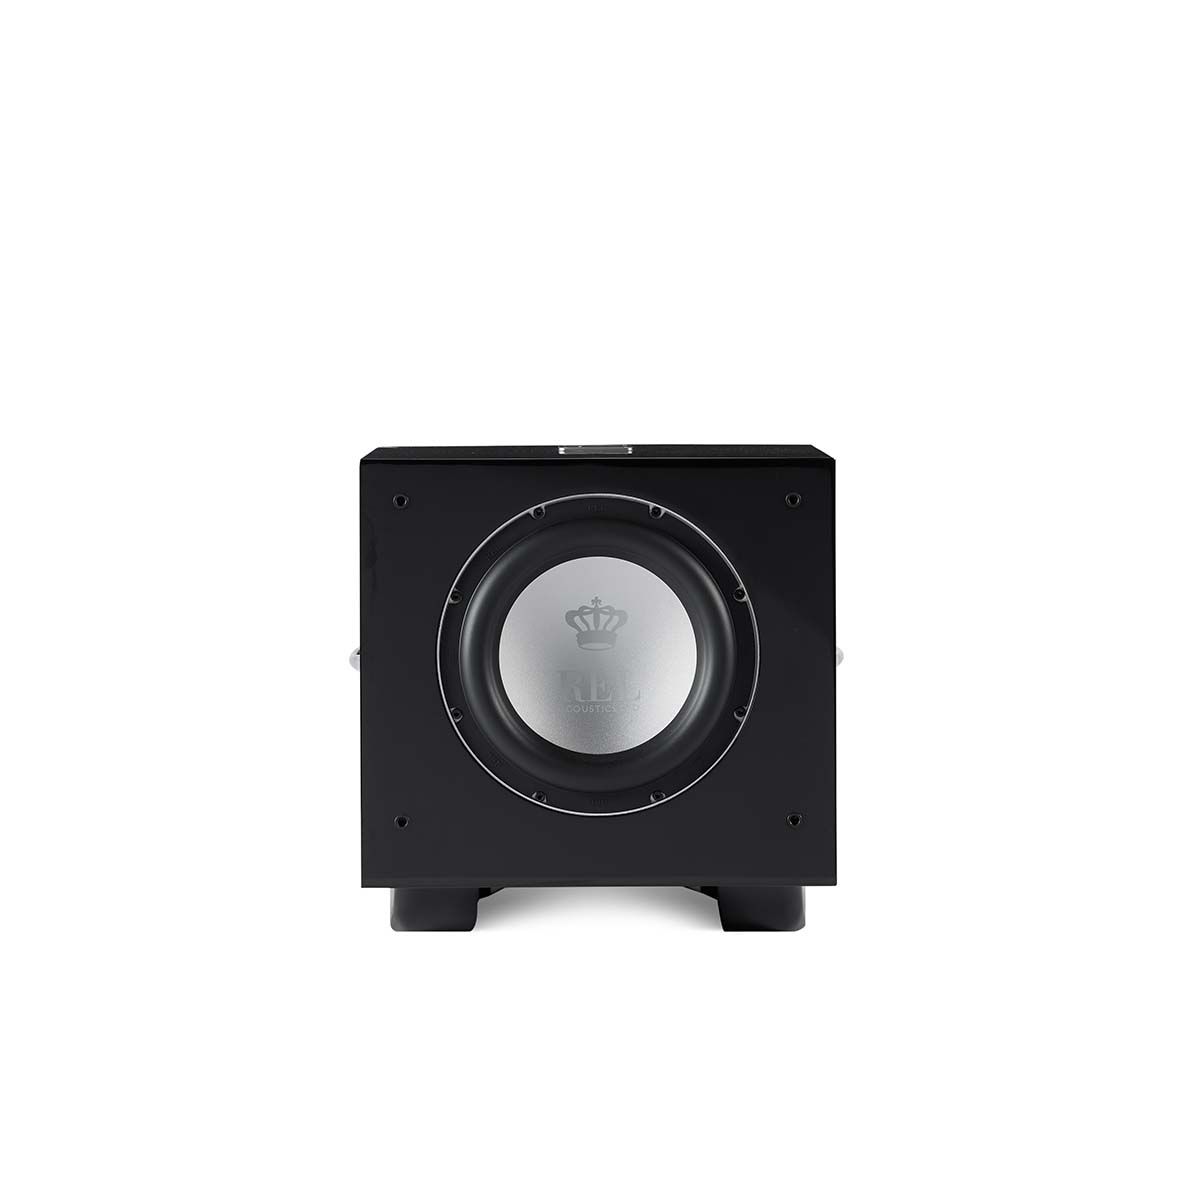 REL Acoustics S/510 Subwoofer, Black, front view without grille